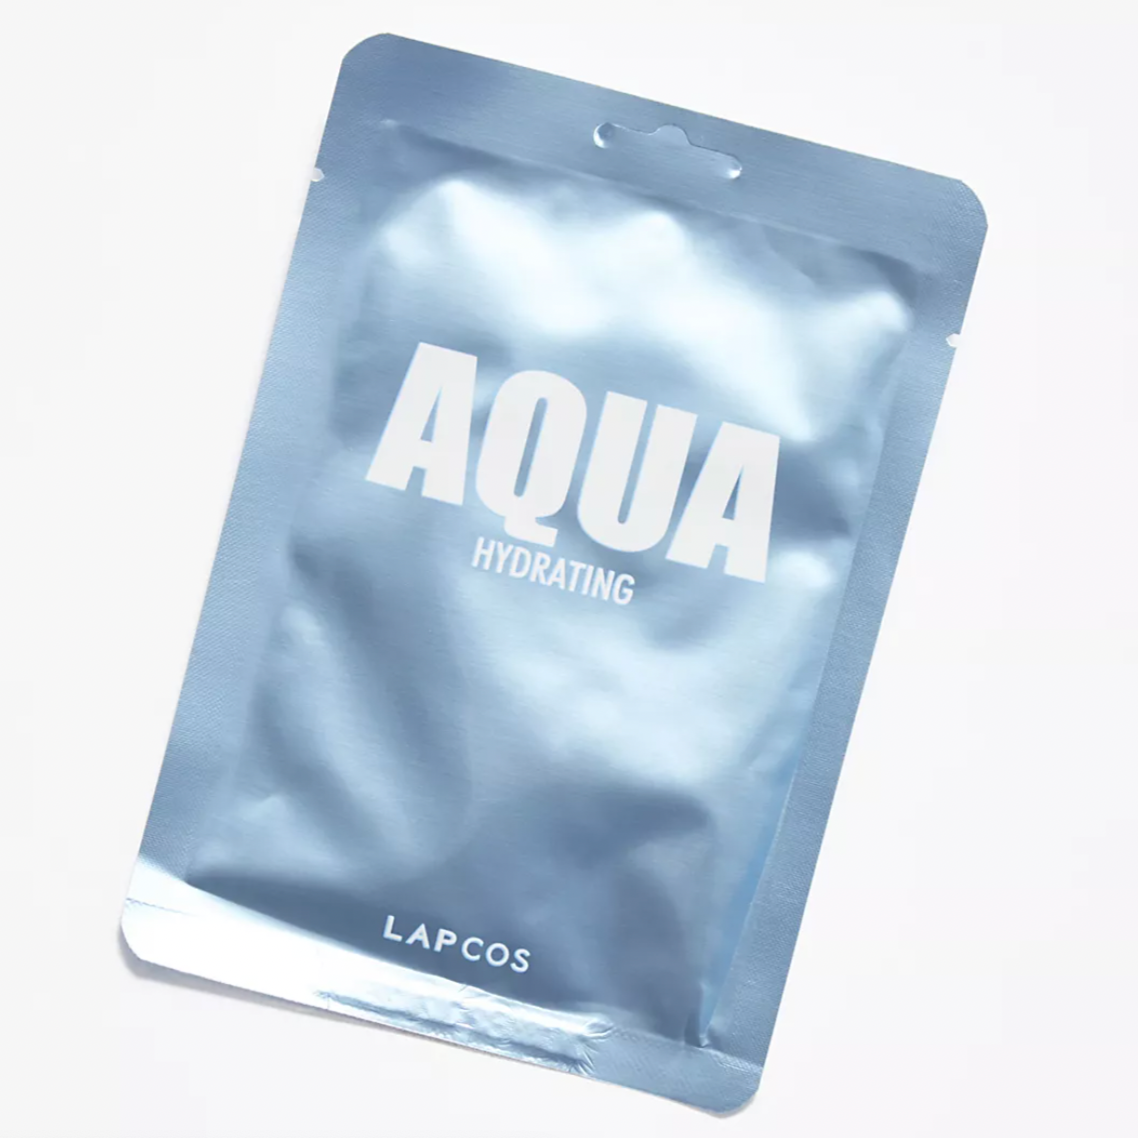 Blue face mask that reads "AQUA HYDRATING LAPCOS"